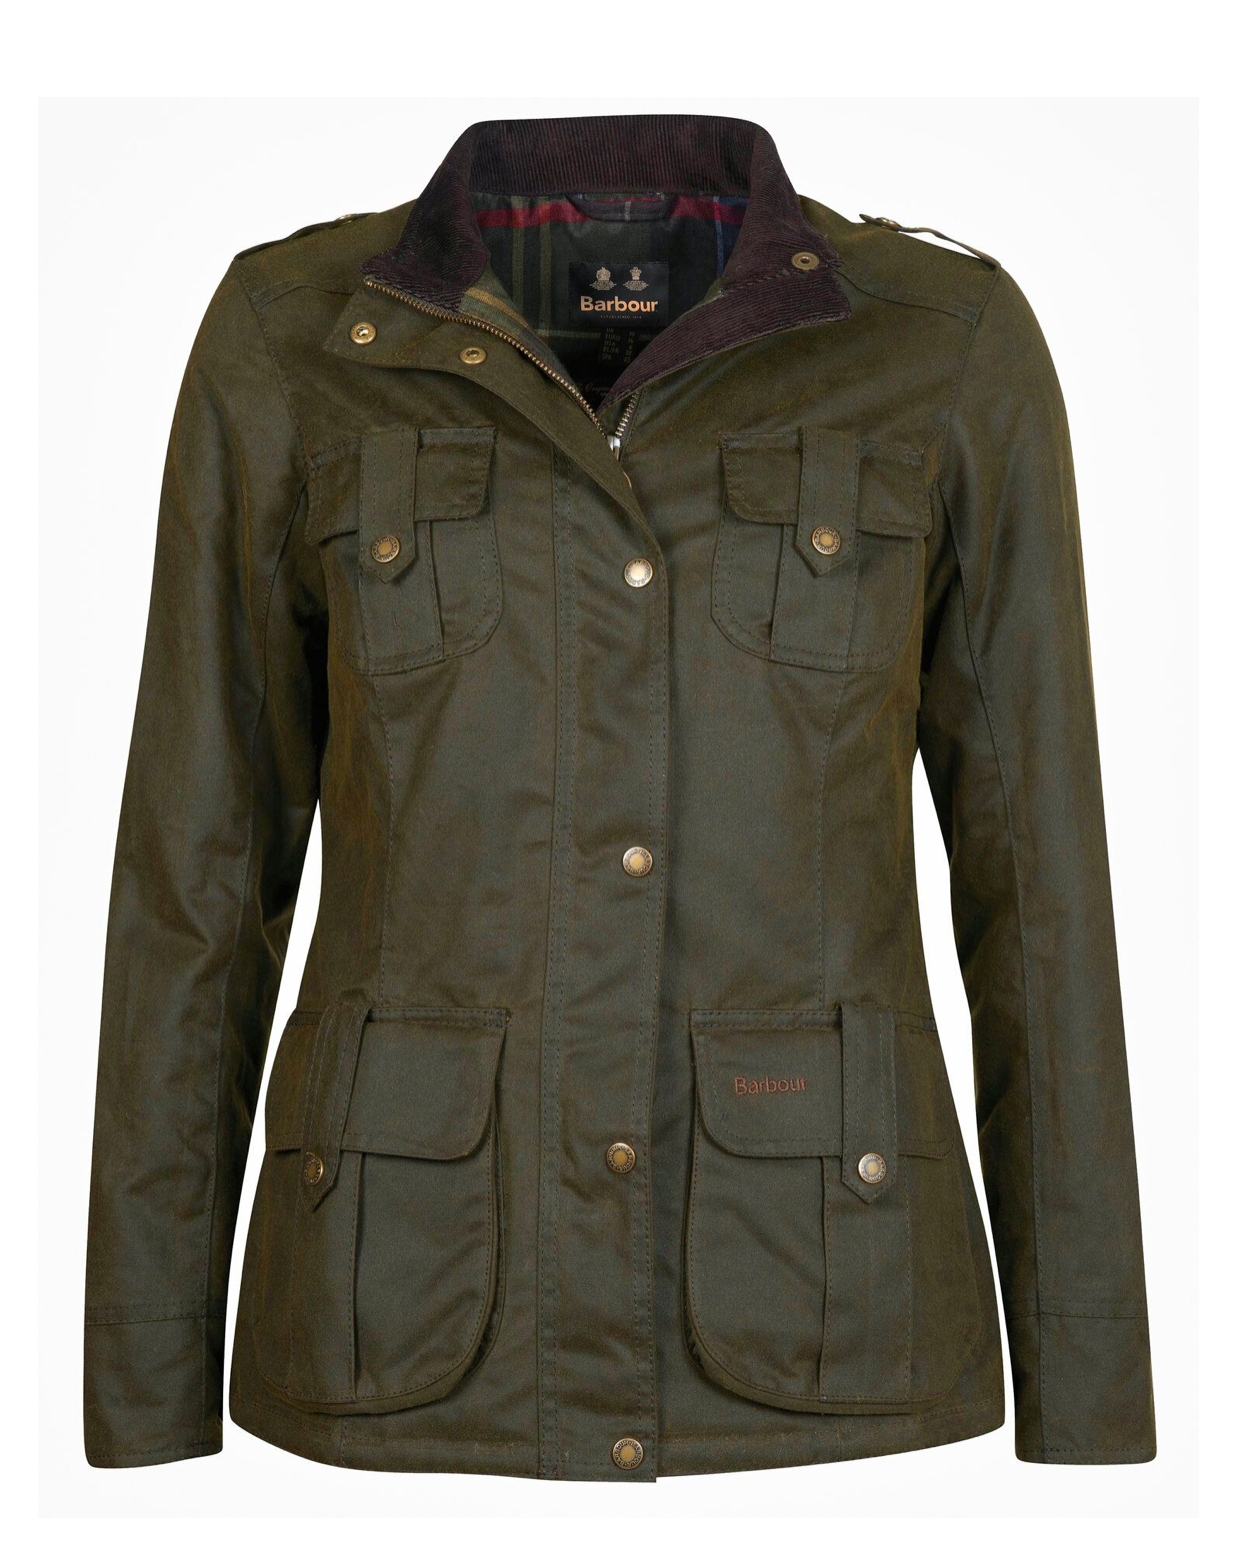 Image of Barbour Winter Defence Olive Wax Jacket on a white background